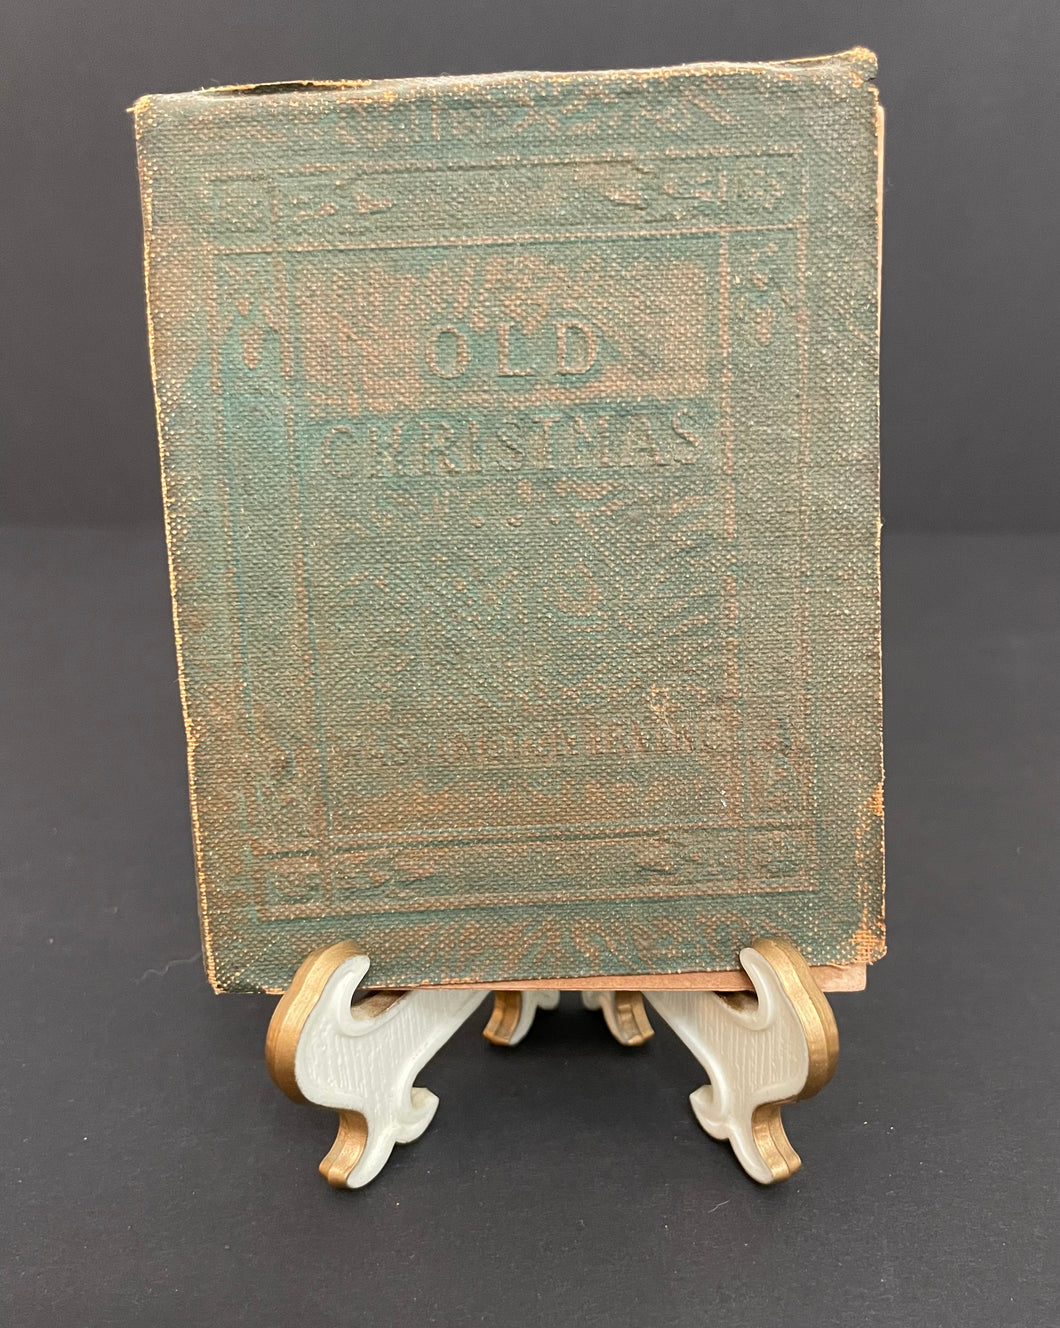 Antique Little Leather Library “Old Christmas” by Washington Irving